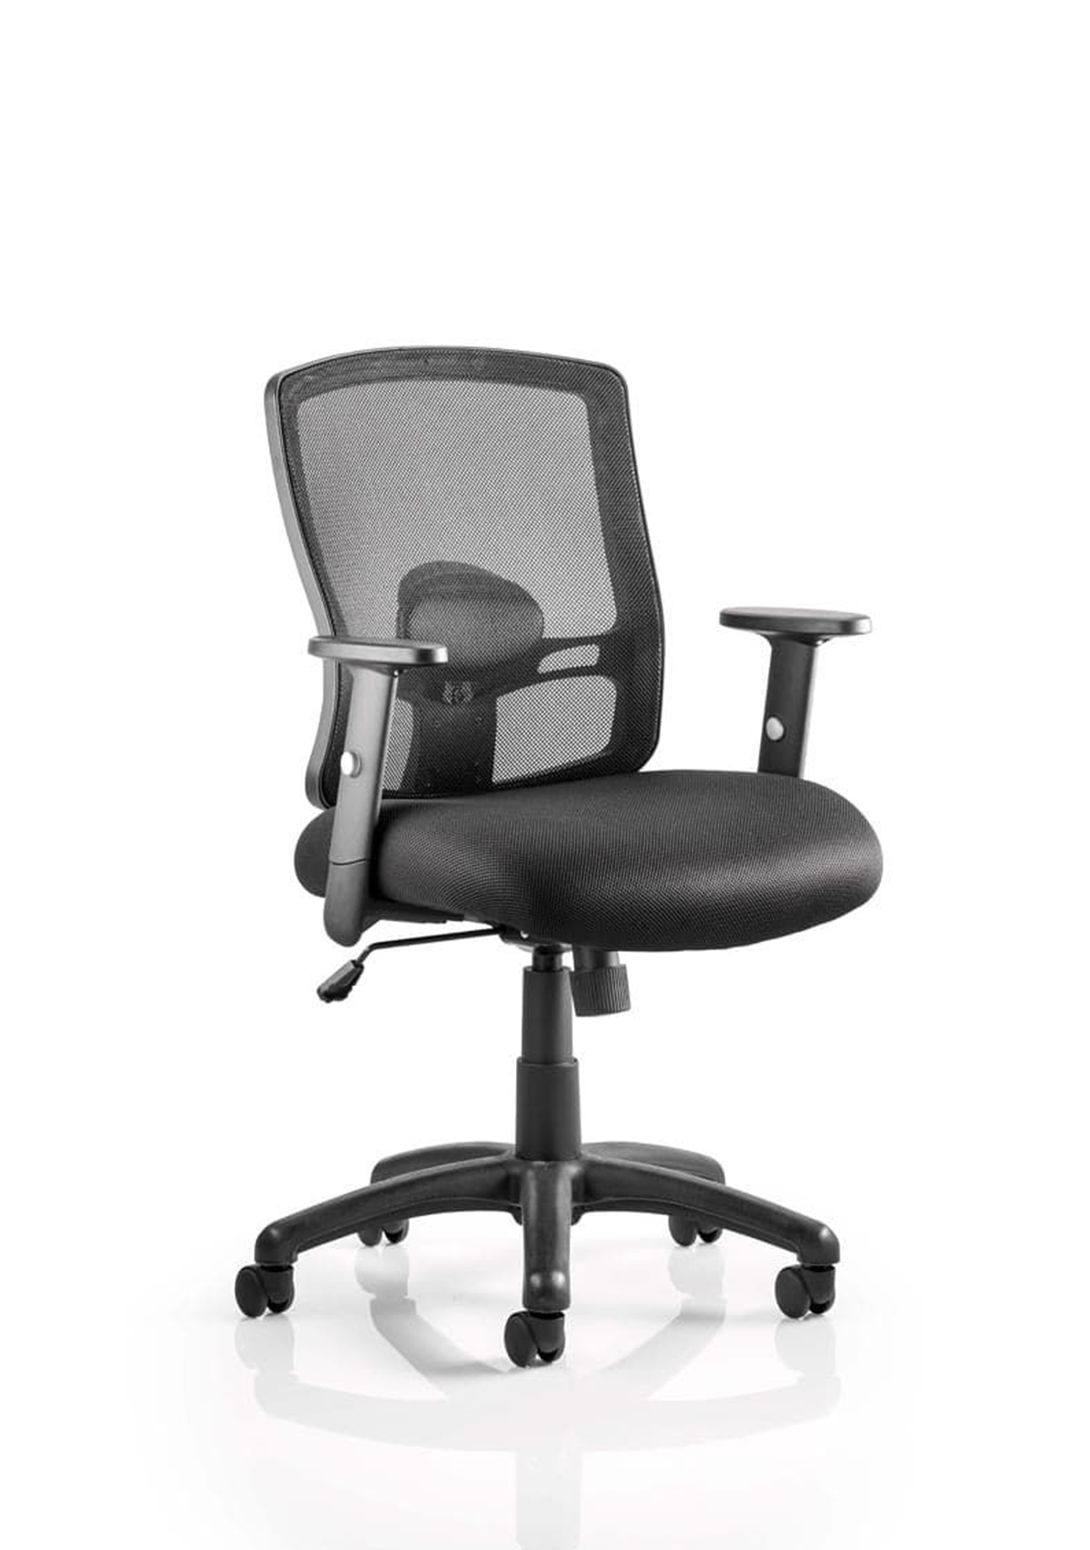 Portland Home Office Chair | Operator Chair | Home Office Furniture | Ergonomic Chair | Ergonomic Office Furniture